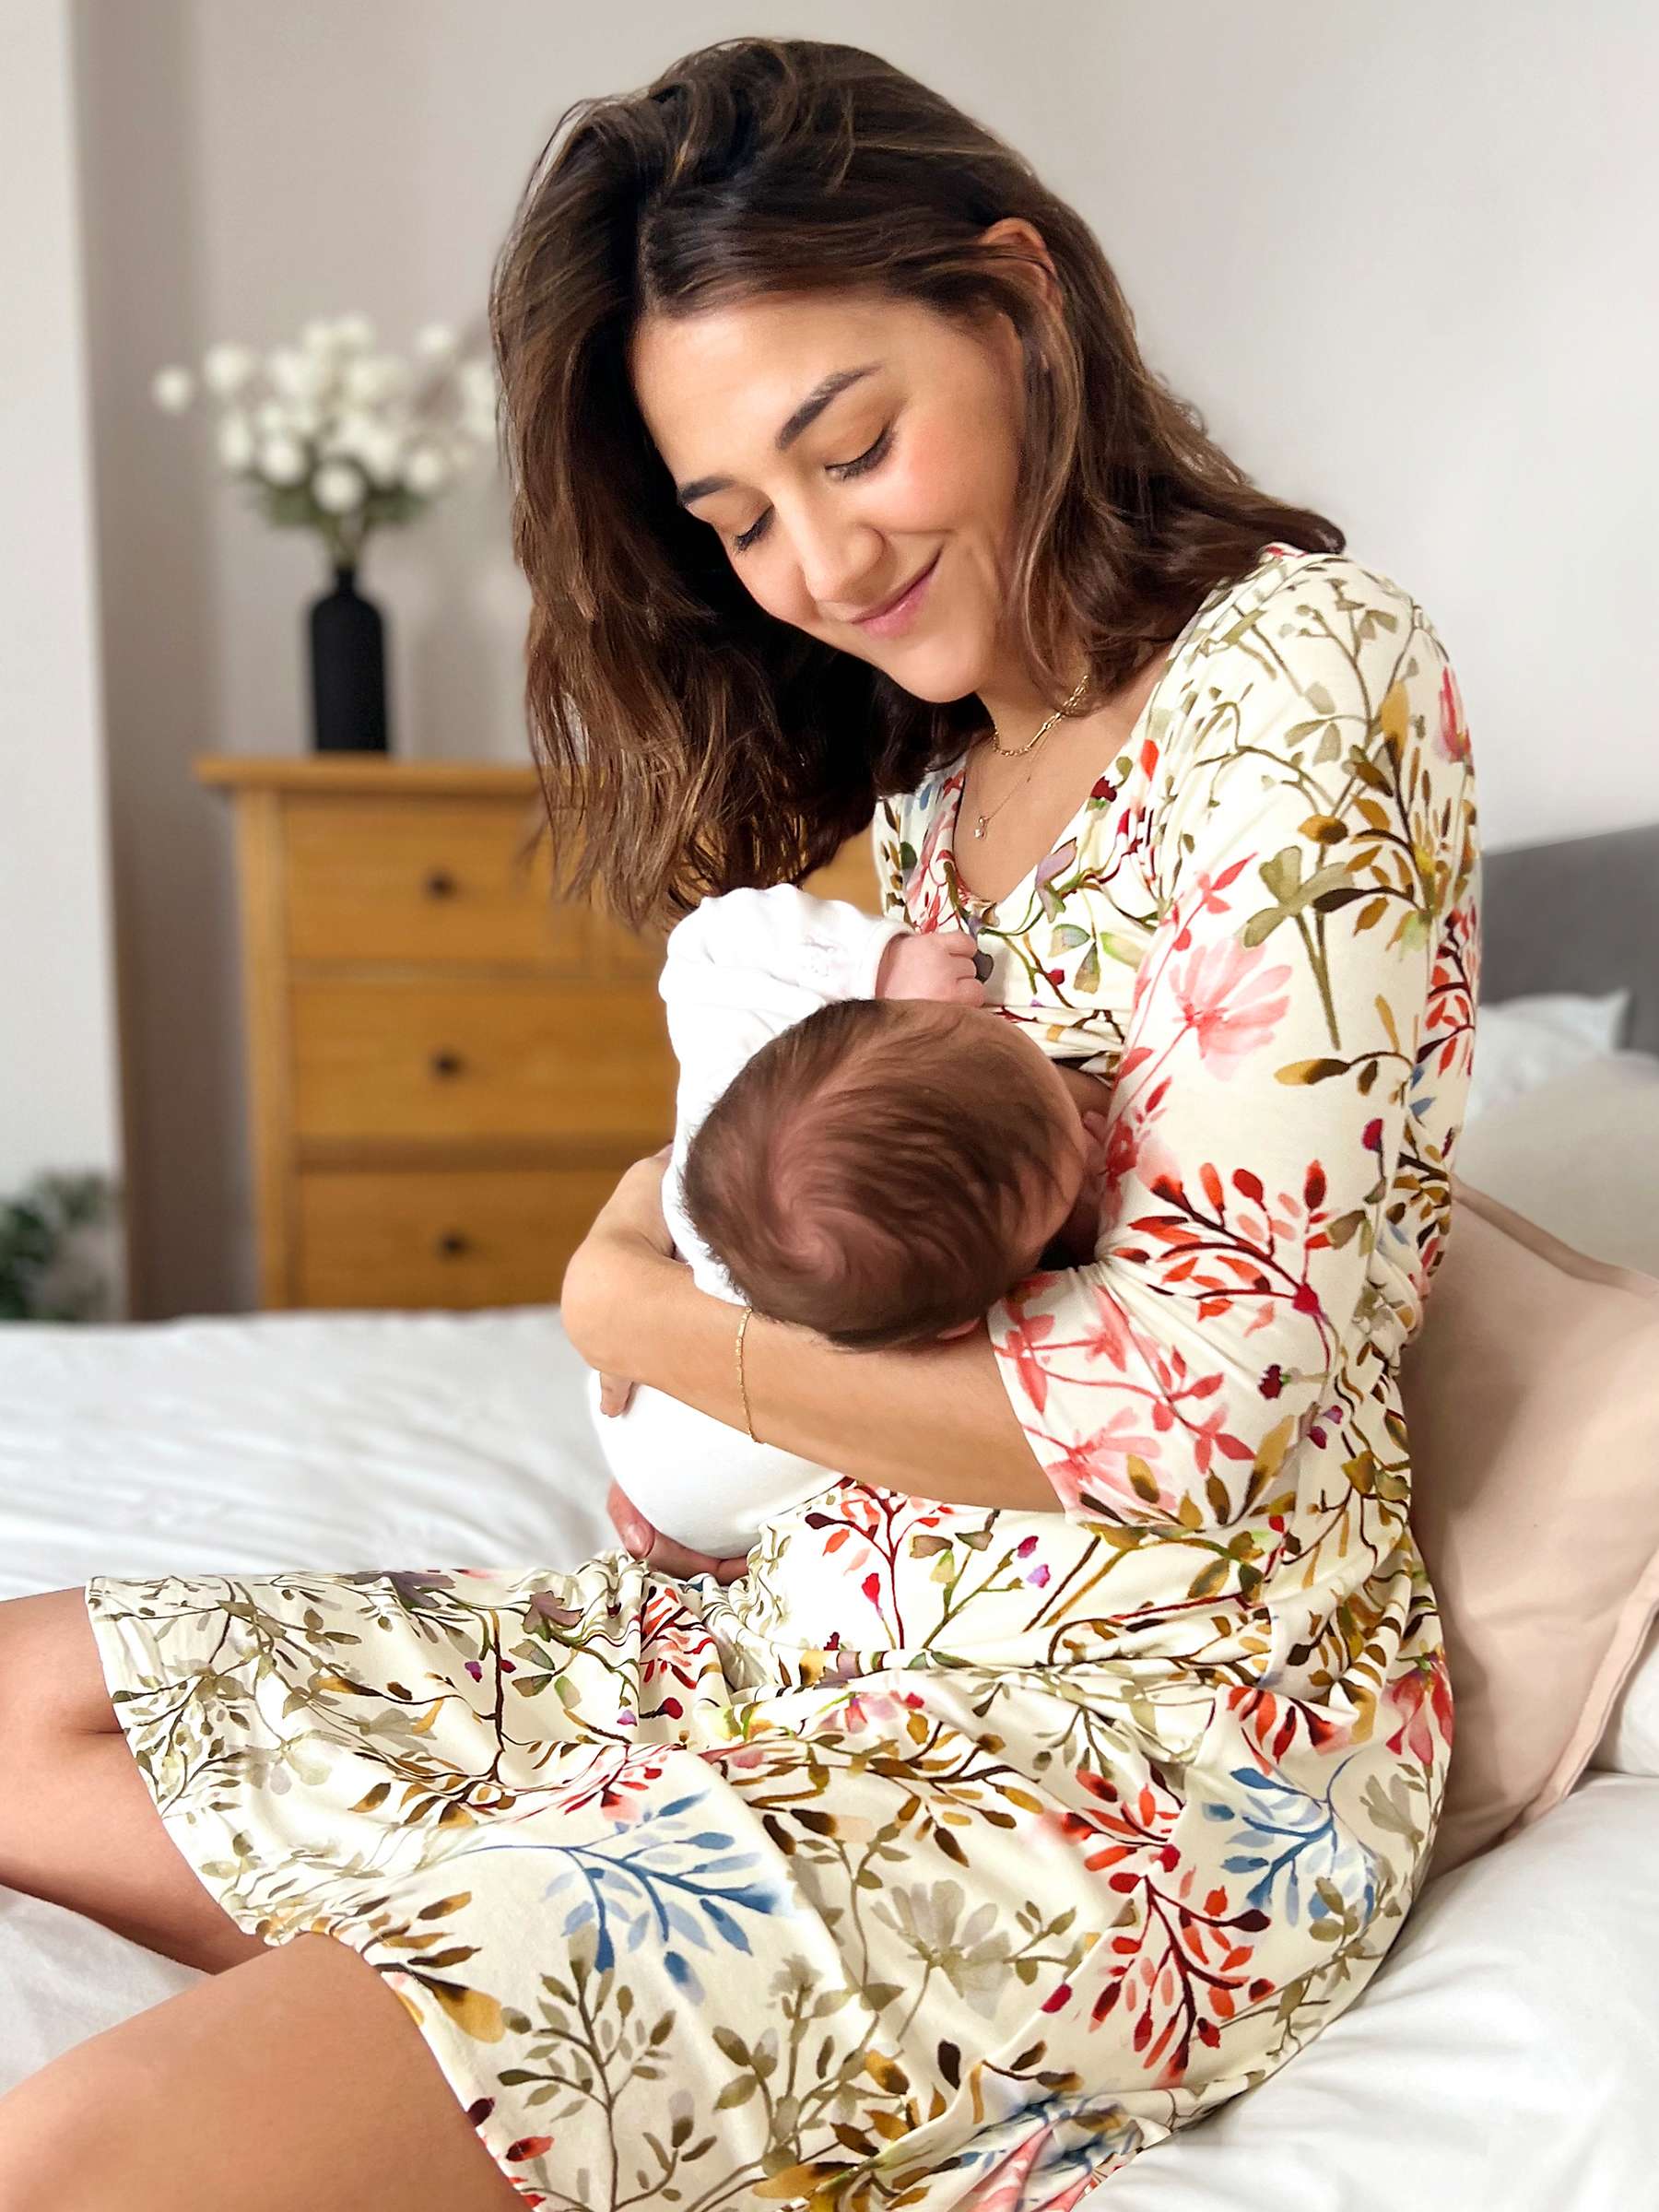 Buy Tiffany Rose Naomie Floral Maternity and Nursing Dress, Watercolour Meadow Online at johnlewis.com